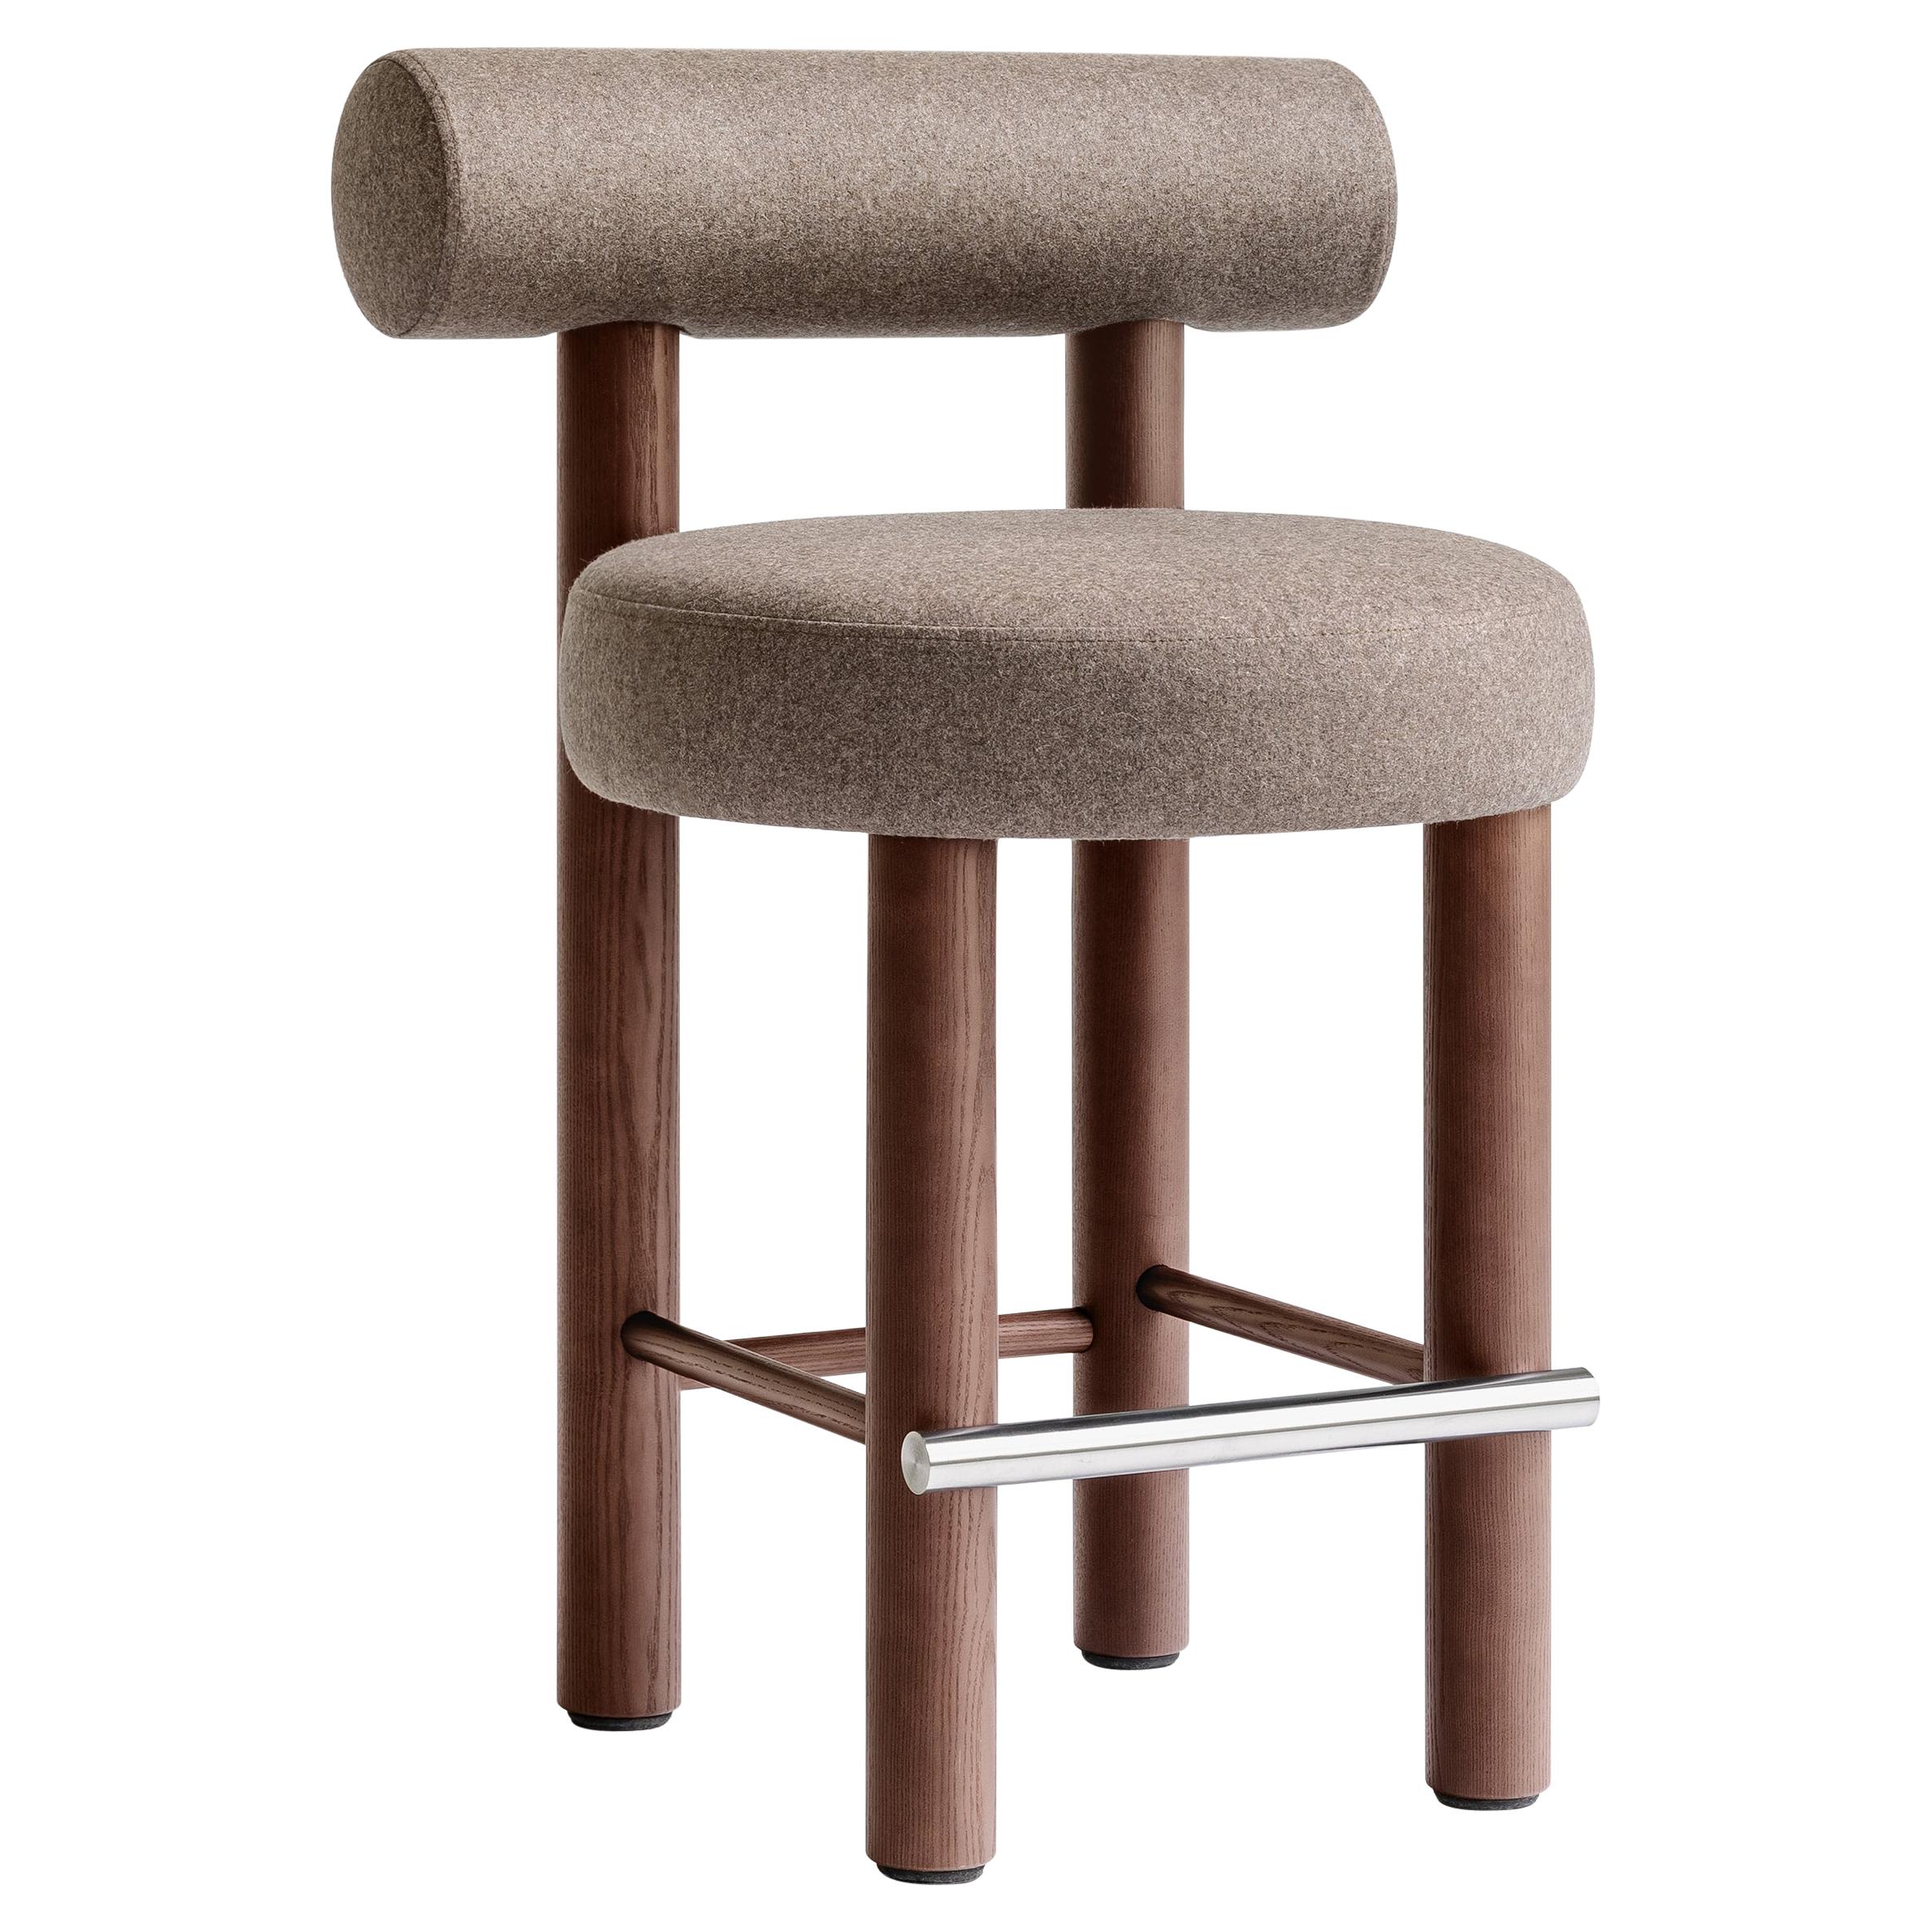 Modern Counter Chair Gropius CS2/65 in Wool Fabric with Wooden Legs by Noom